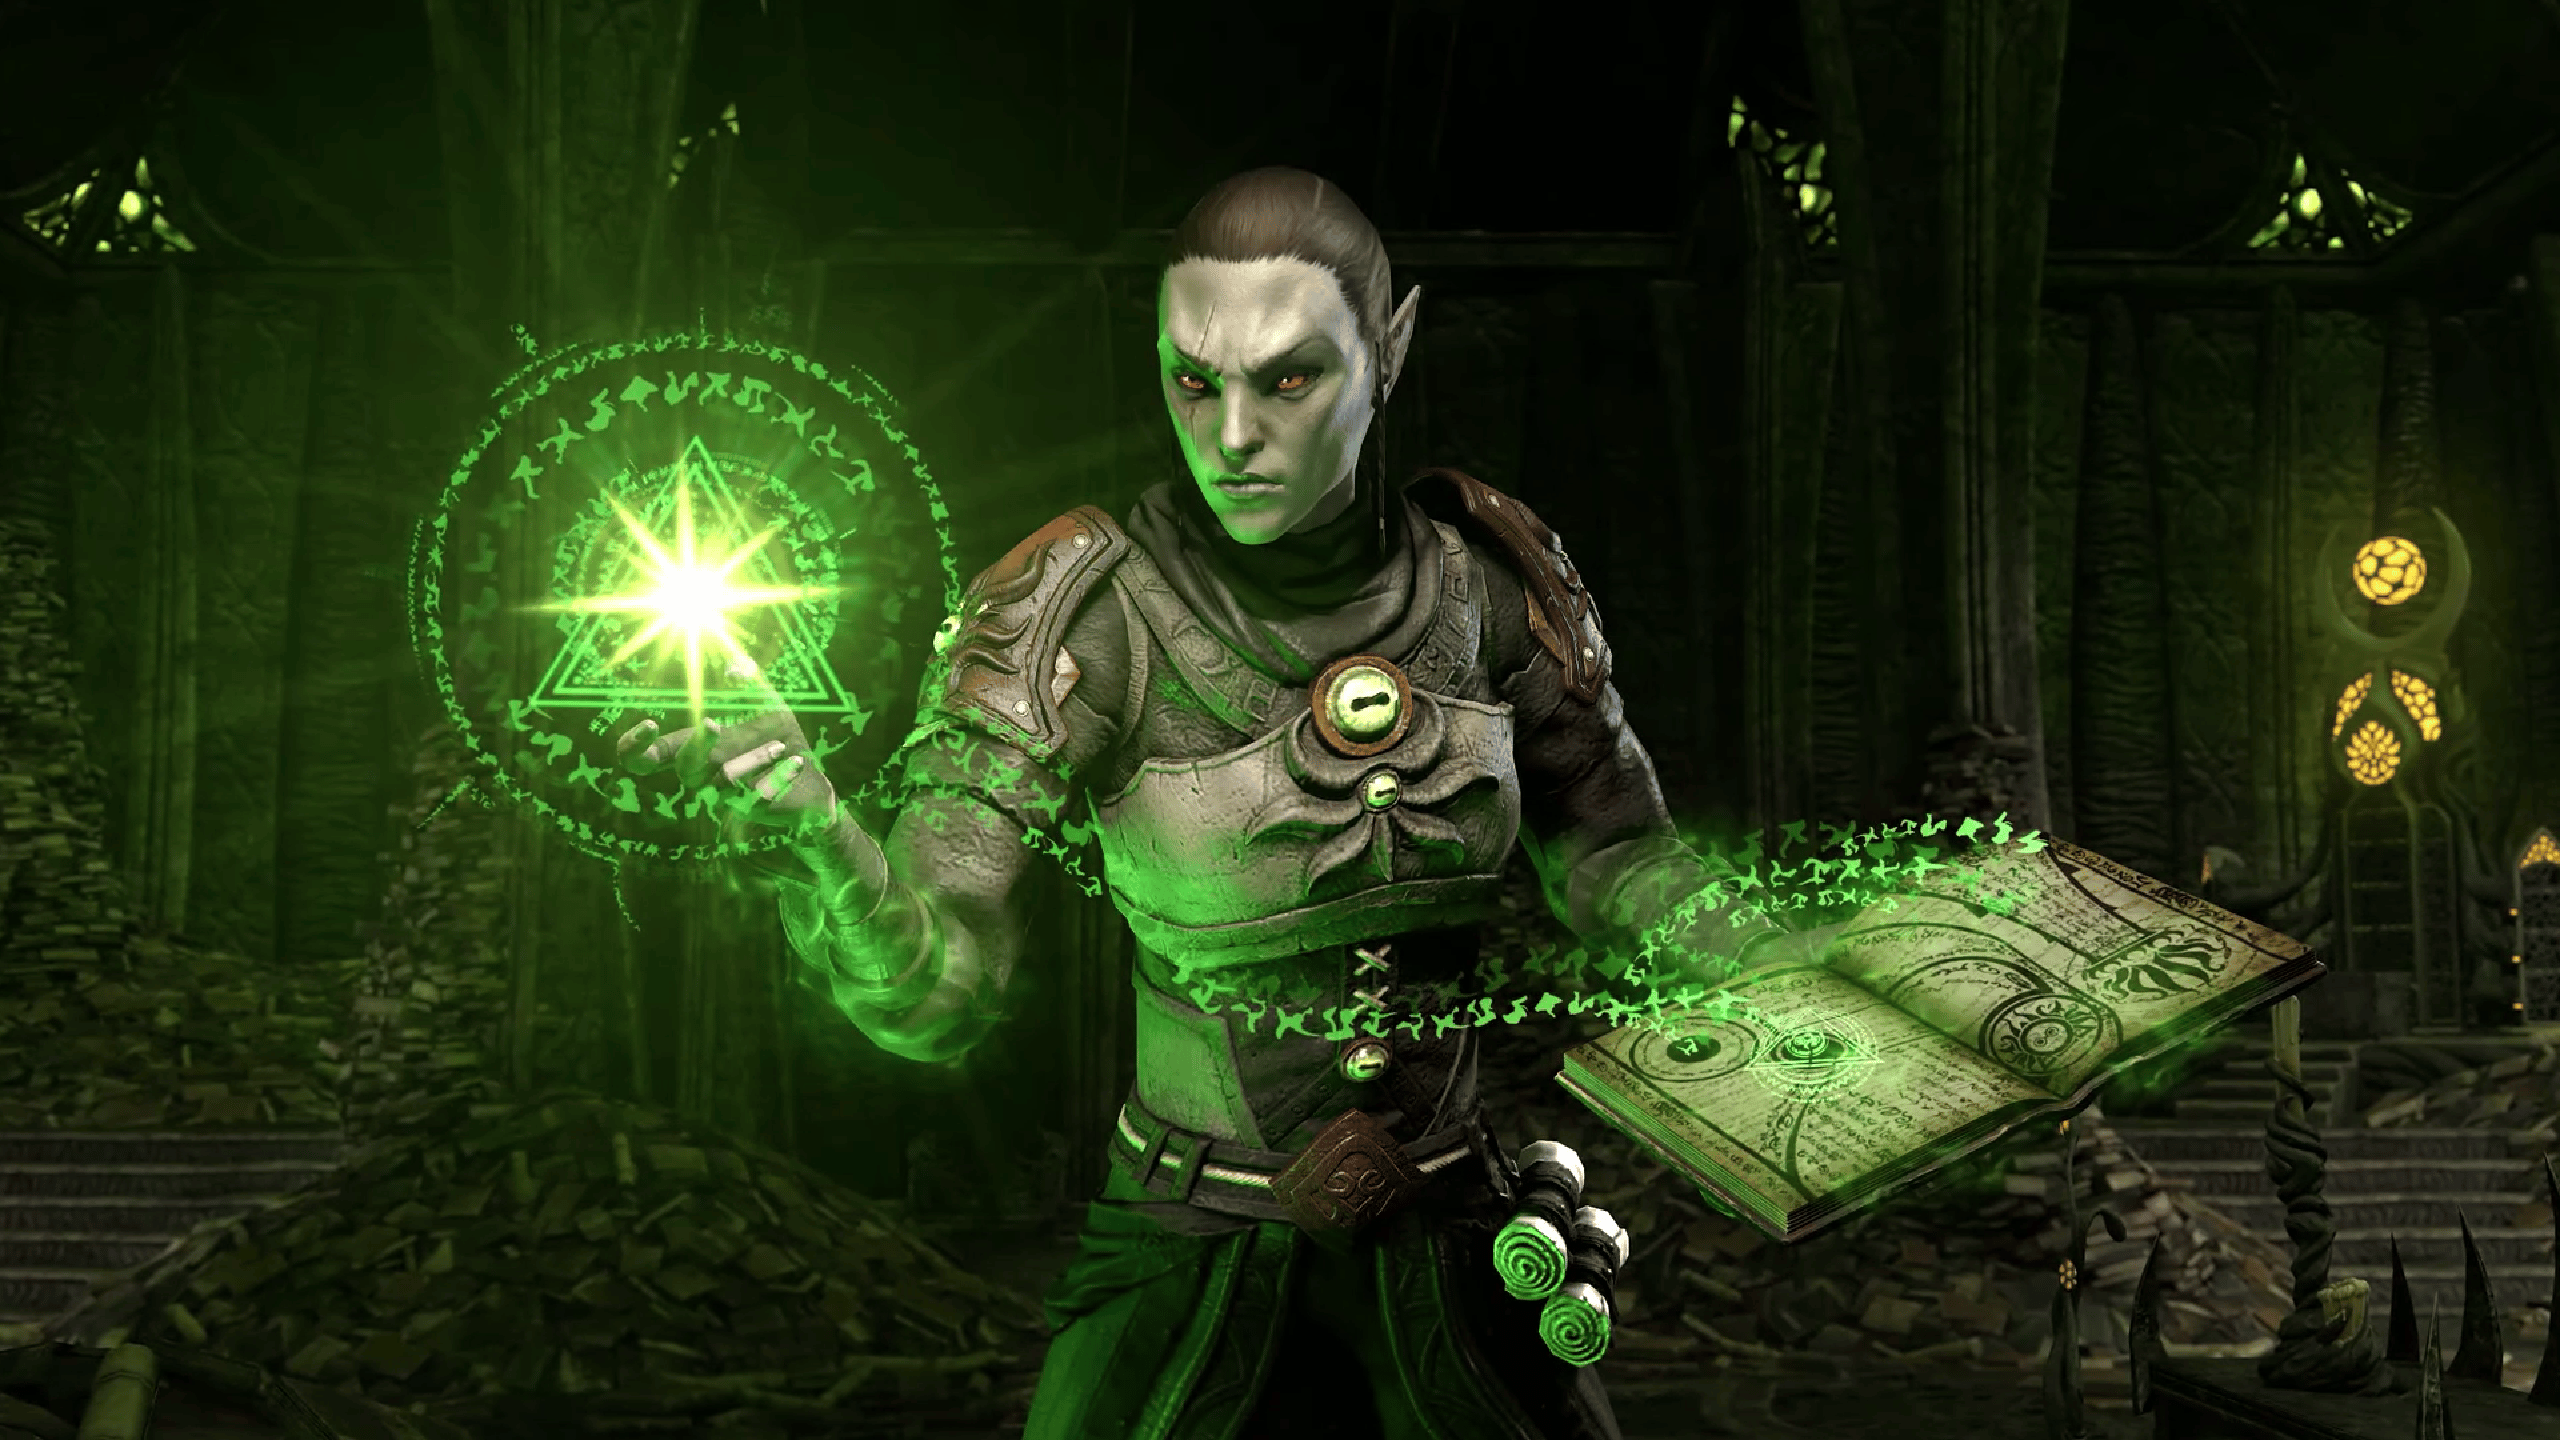 The Elder Scrolls Online Update 39 for August 20 Now Live, Patch Notes  Listed